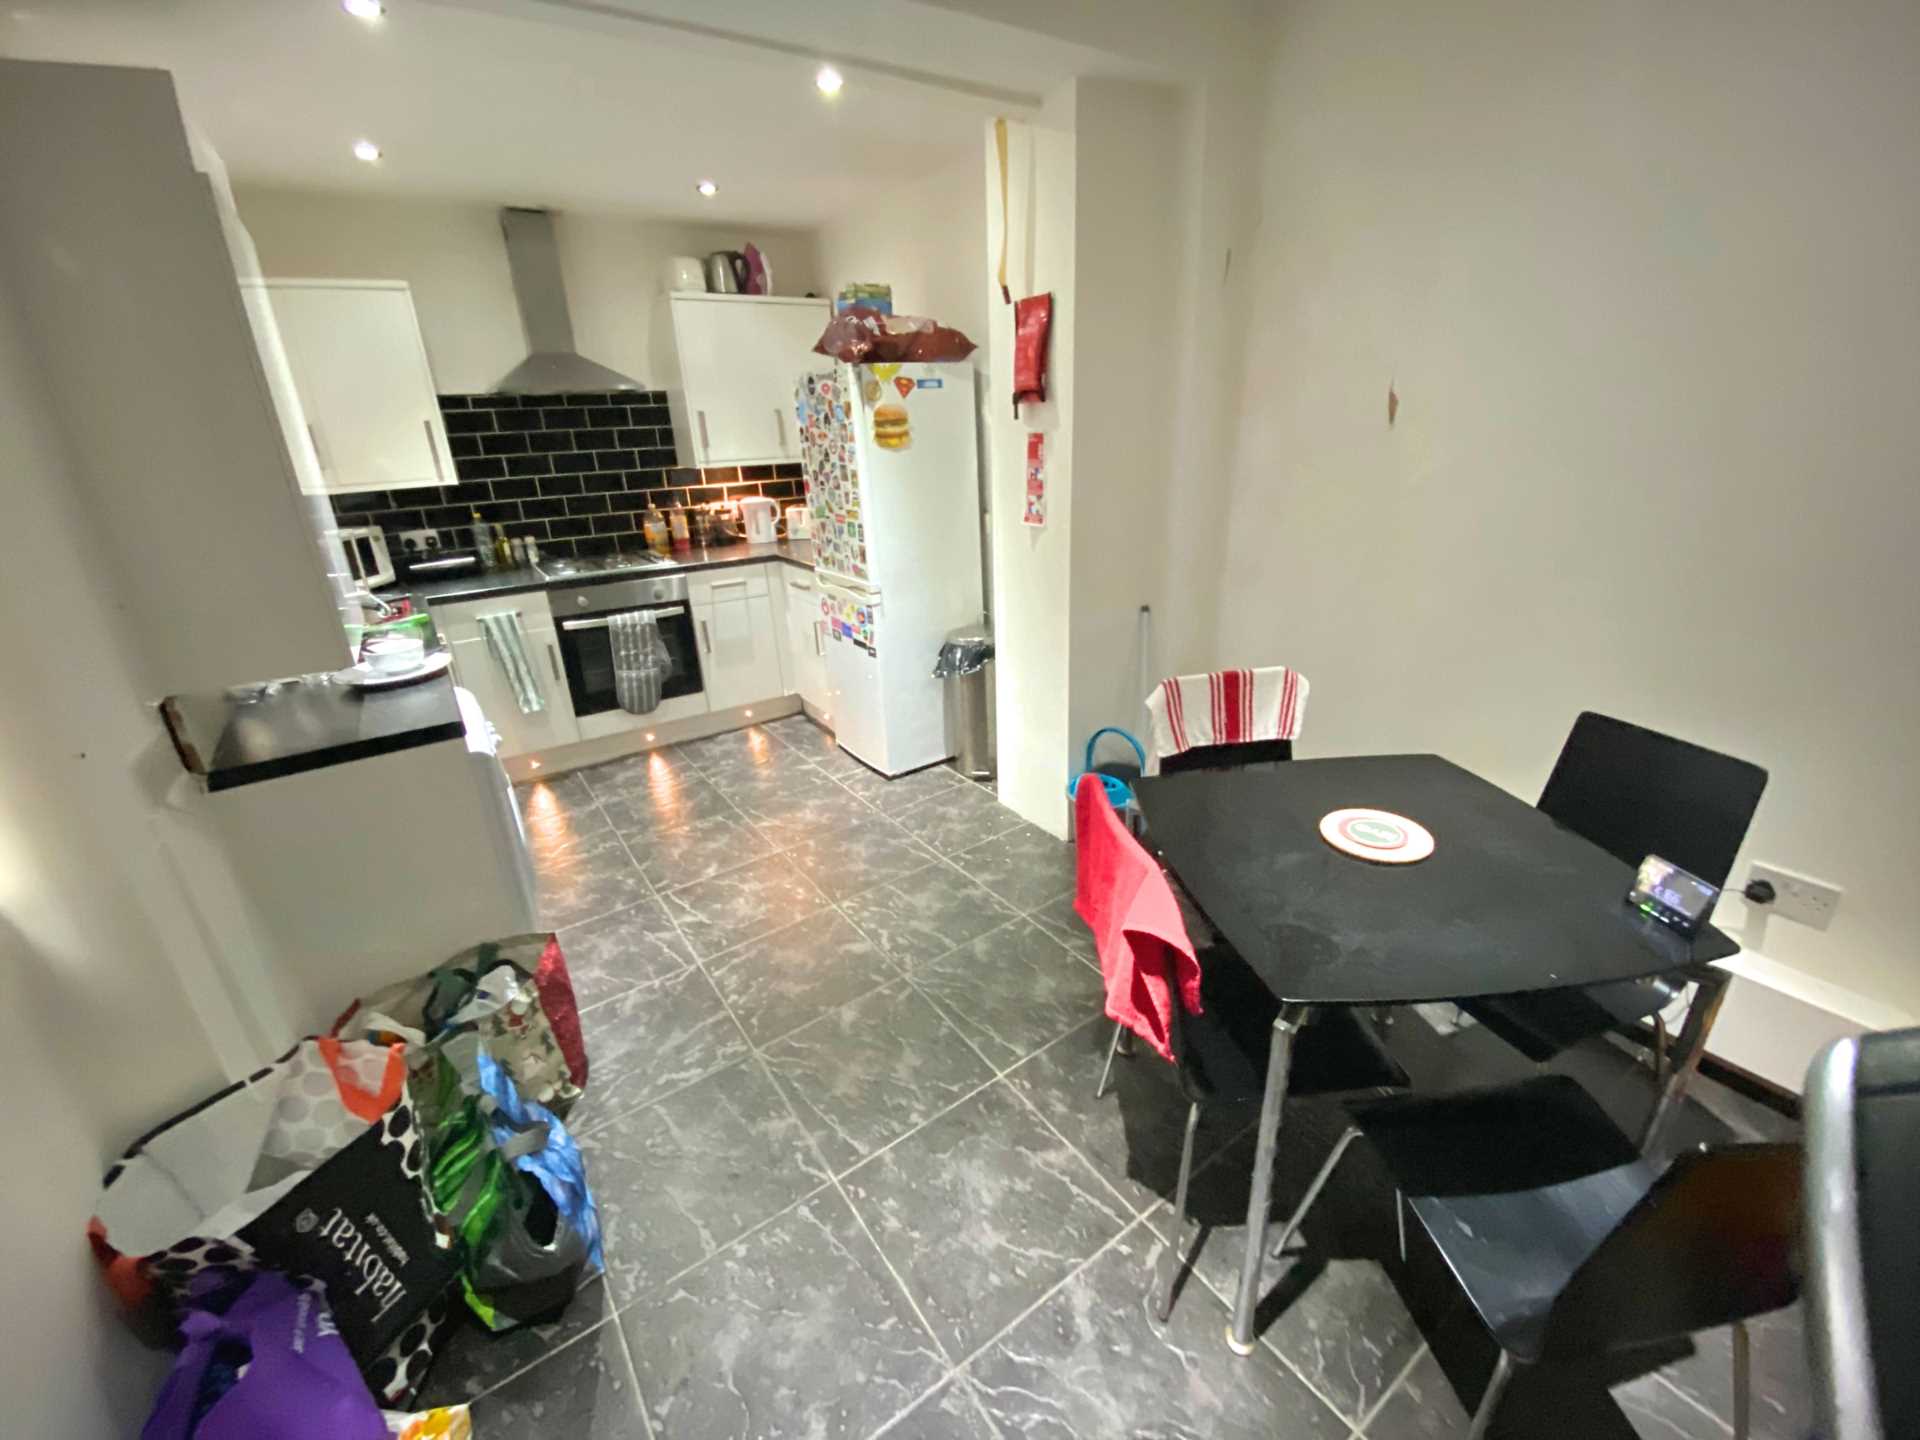 4 bed Room for rent in Salford. From Student Haus